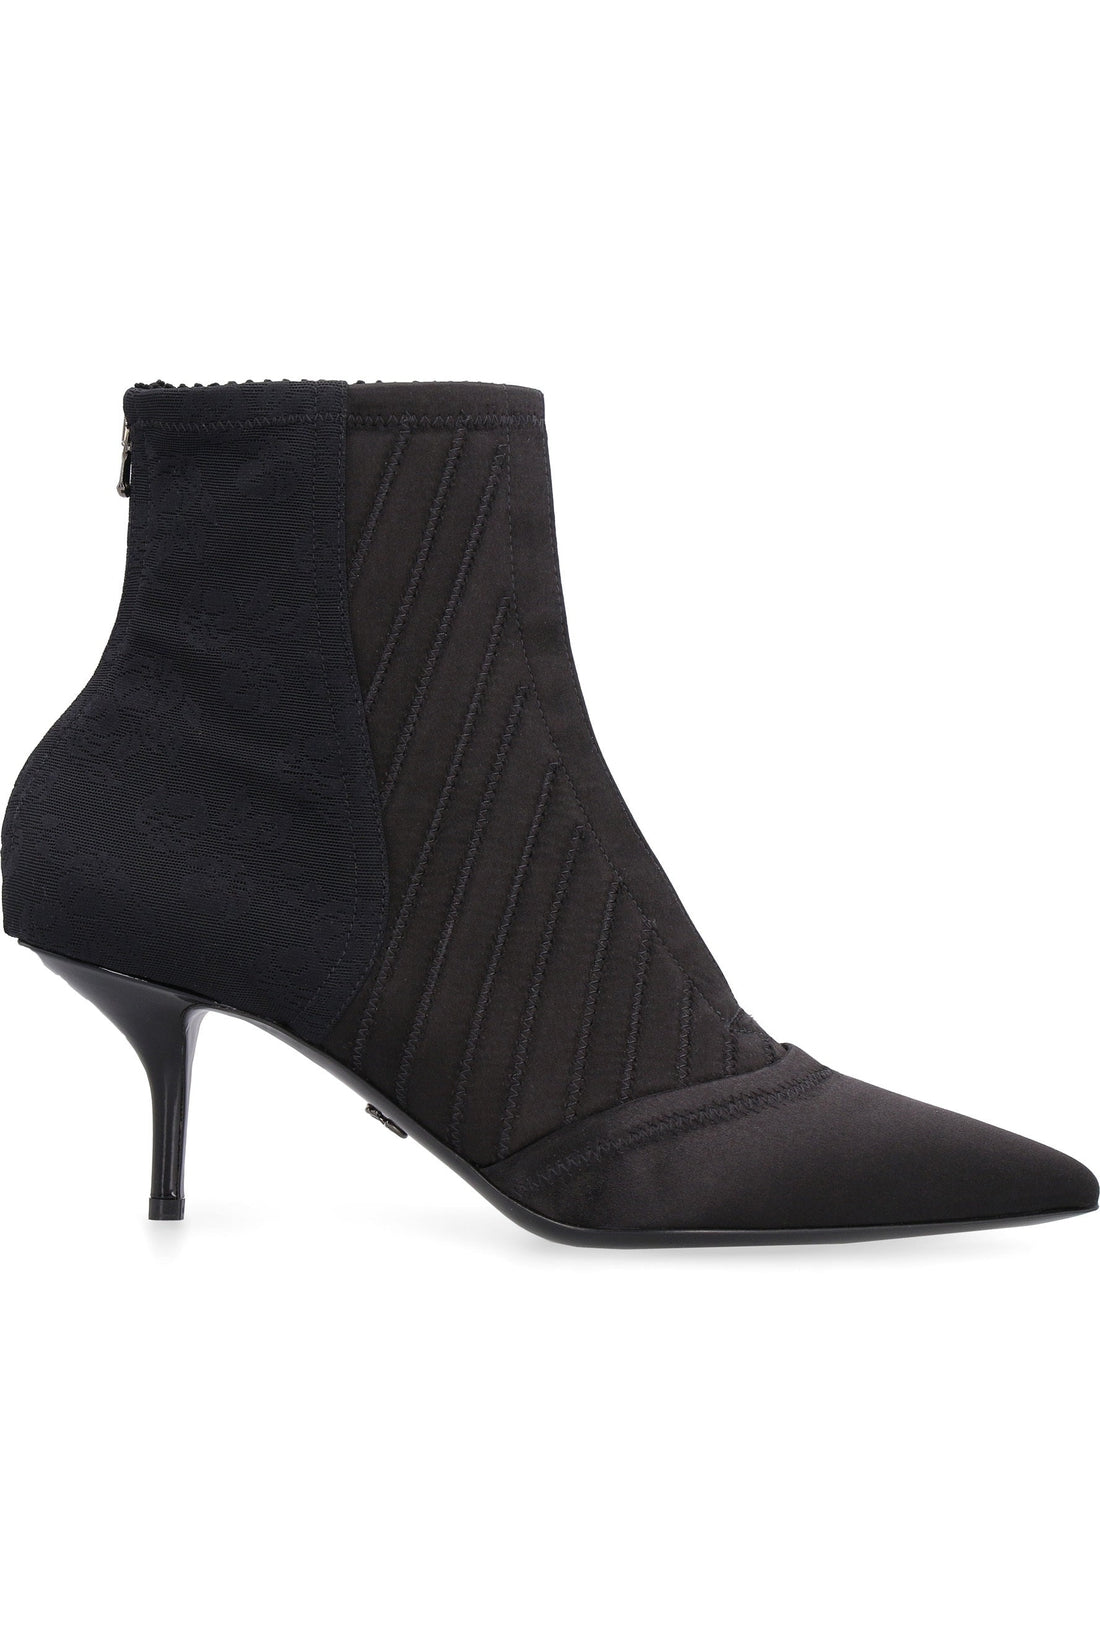 Dolce & Gabbana-OUTLET-SALE-Fabric ankle boots-ARCHIVIST